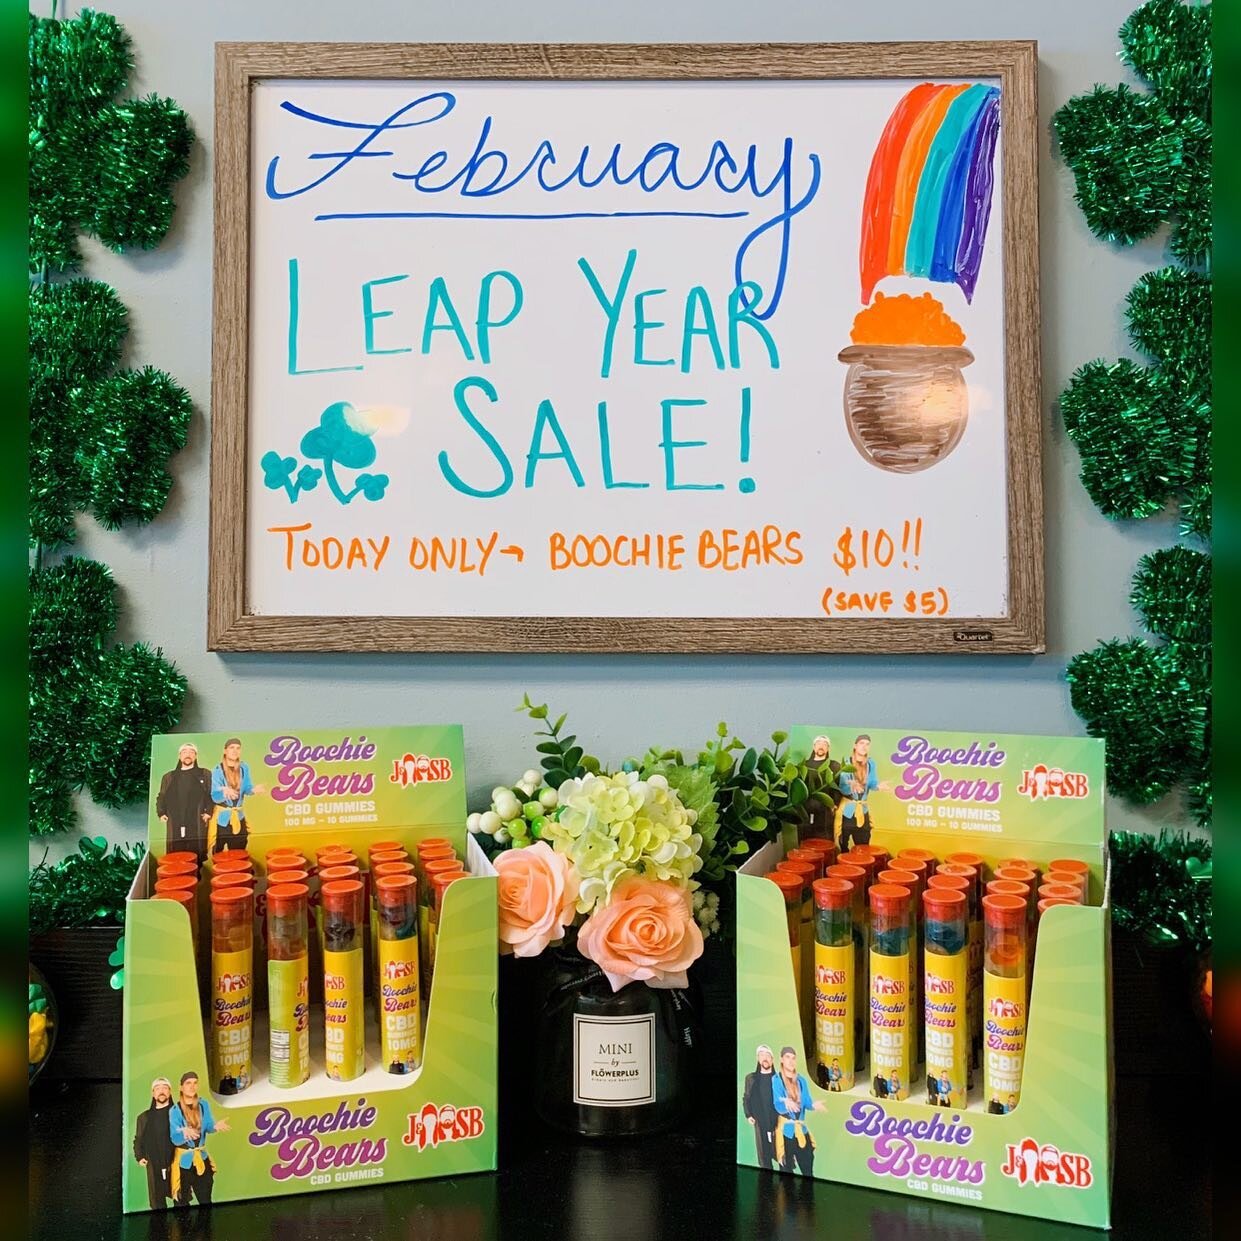 🚨 LEAP YEAR SALE 🍀 Today only get Jay and Silent Bob CBD Boochie Bears for just $10!!
&mdash;&mdash;&mdash;&mdash;&mdash;&mdash;&mdash;&mdash;&mdash;&mdash;&mdash;&mdash;&mdash;&mdash;&mdash;&mdash;&mdash;&mdash;&mdash;&mdash;&mdash;&mdash;&mdash;&